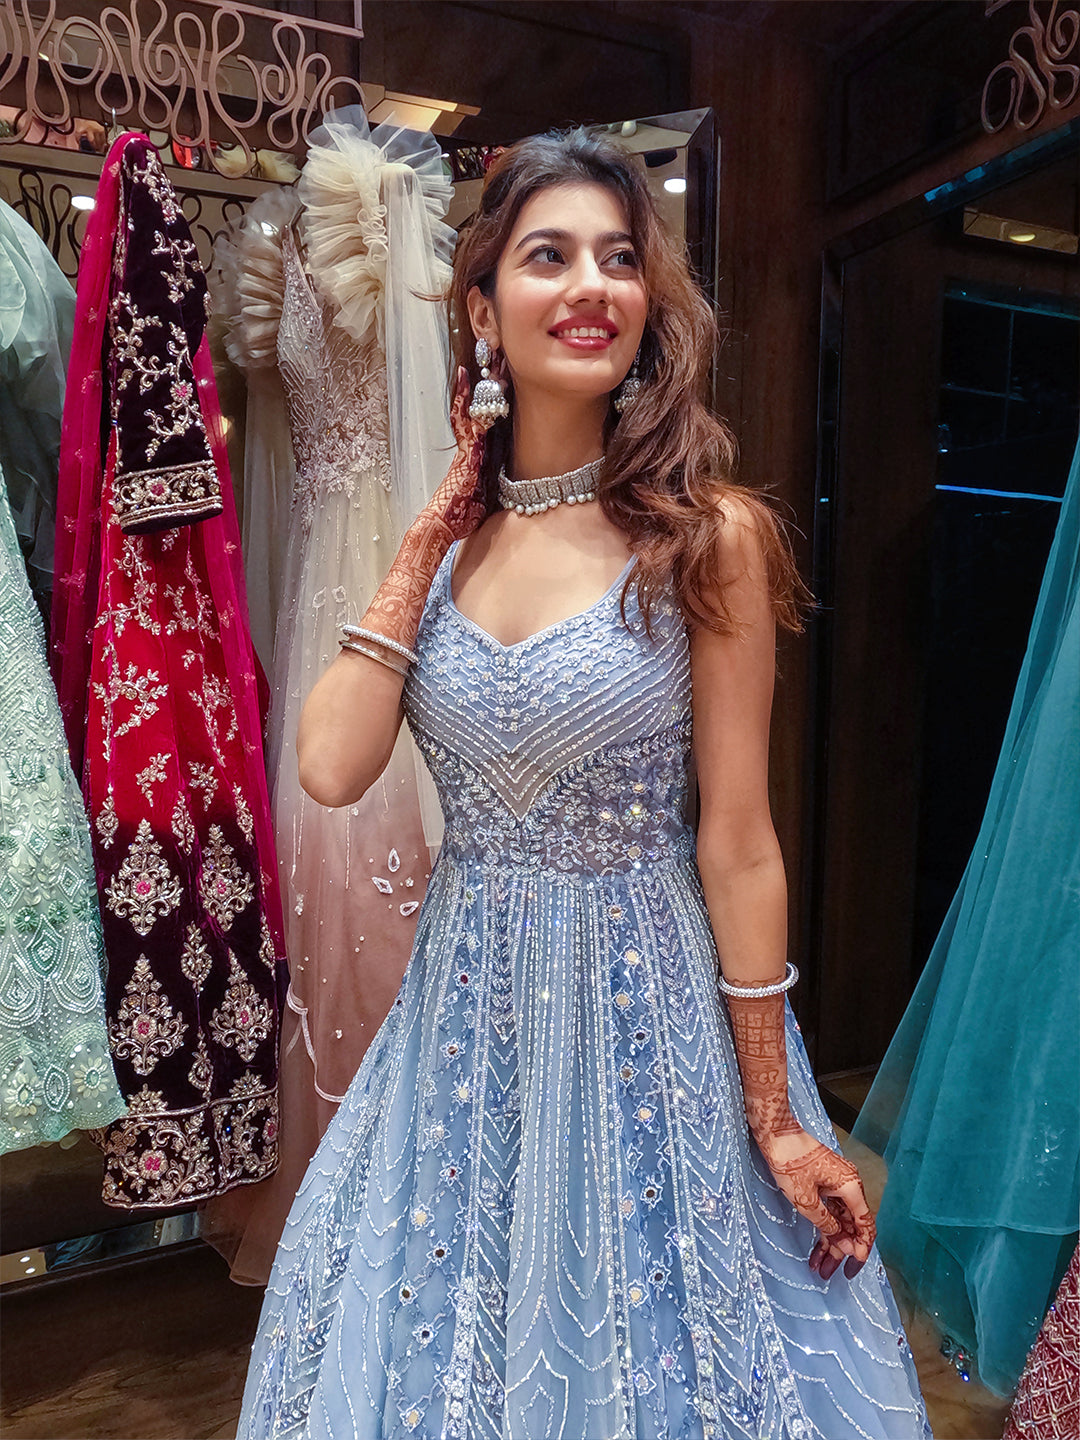 Buy THE LONDON STORE Women's Peacock Blue Strapless Organza Ball Gown  (US-16, Peacock Blue) at Amazon.in